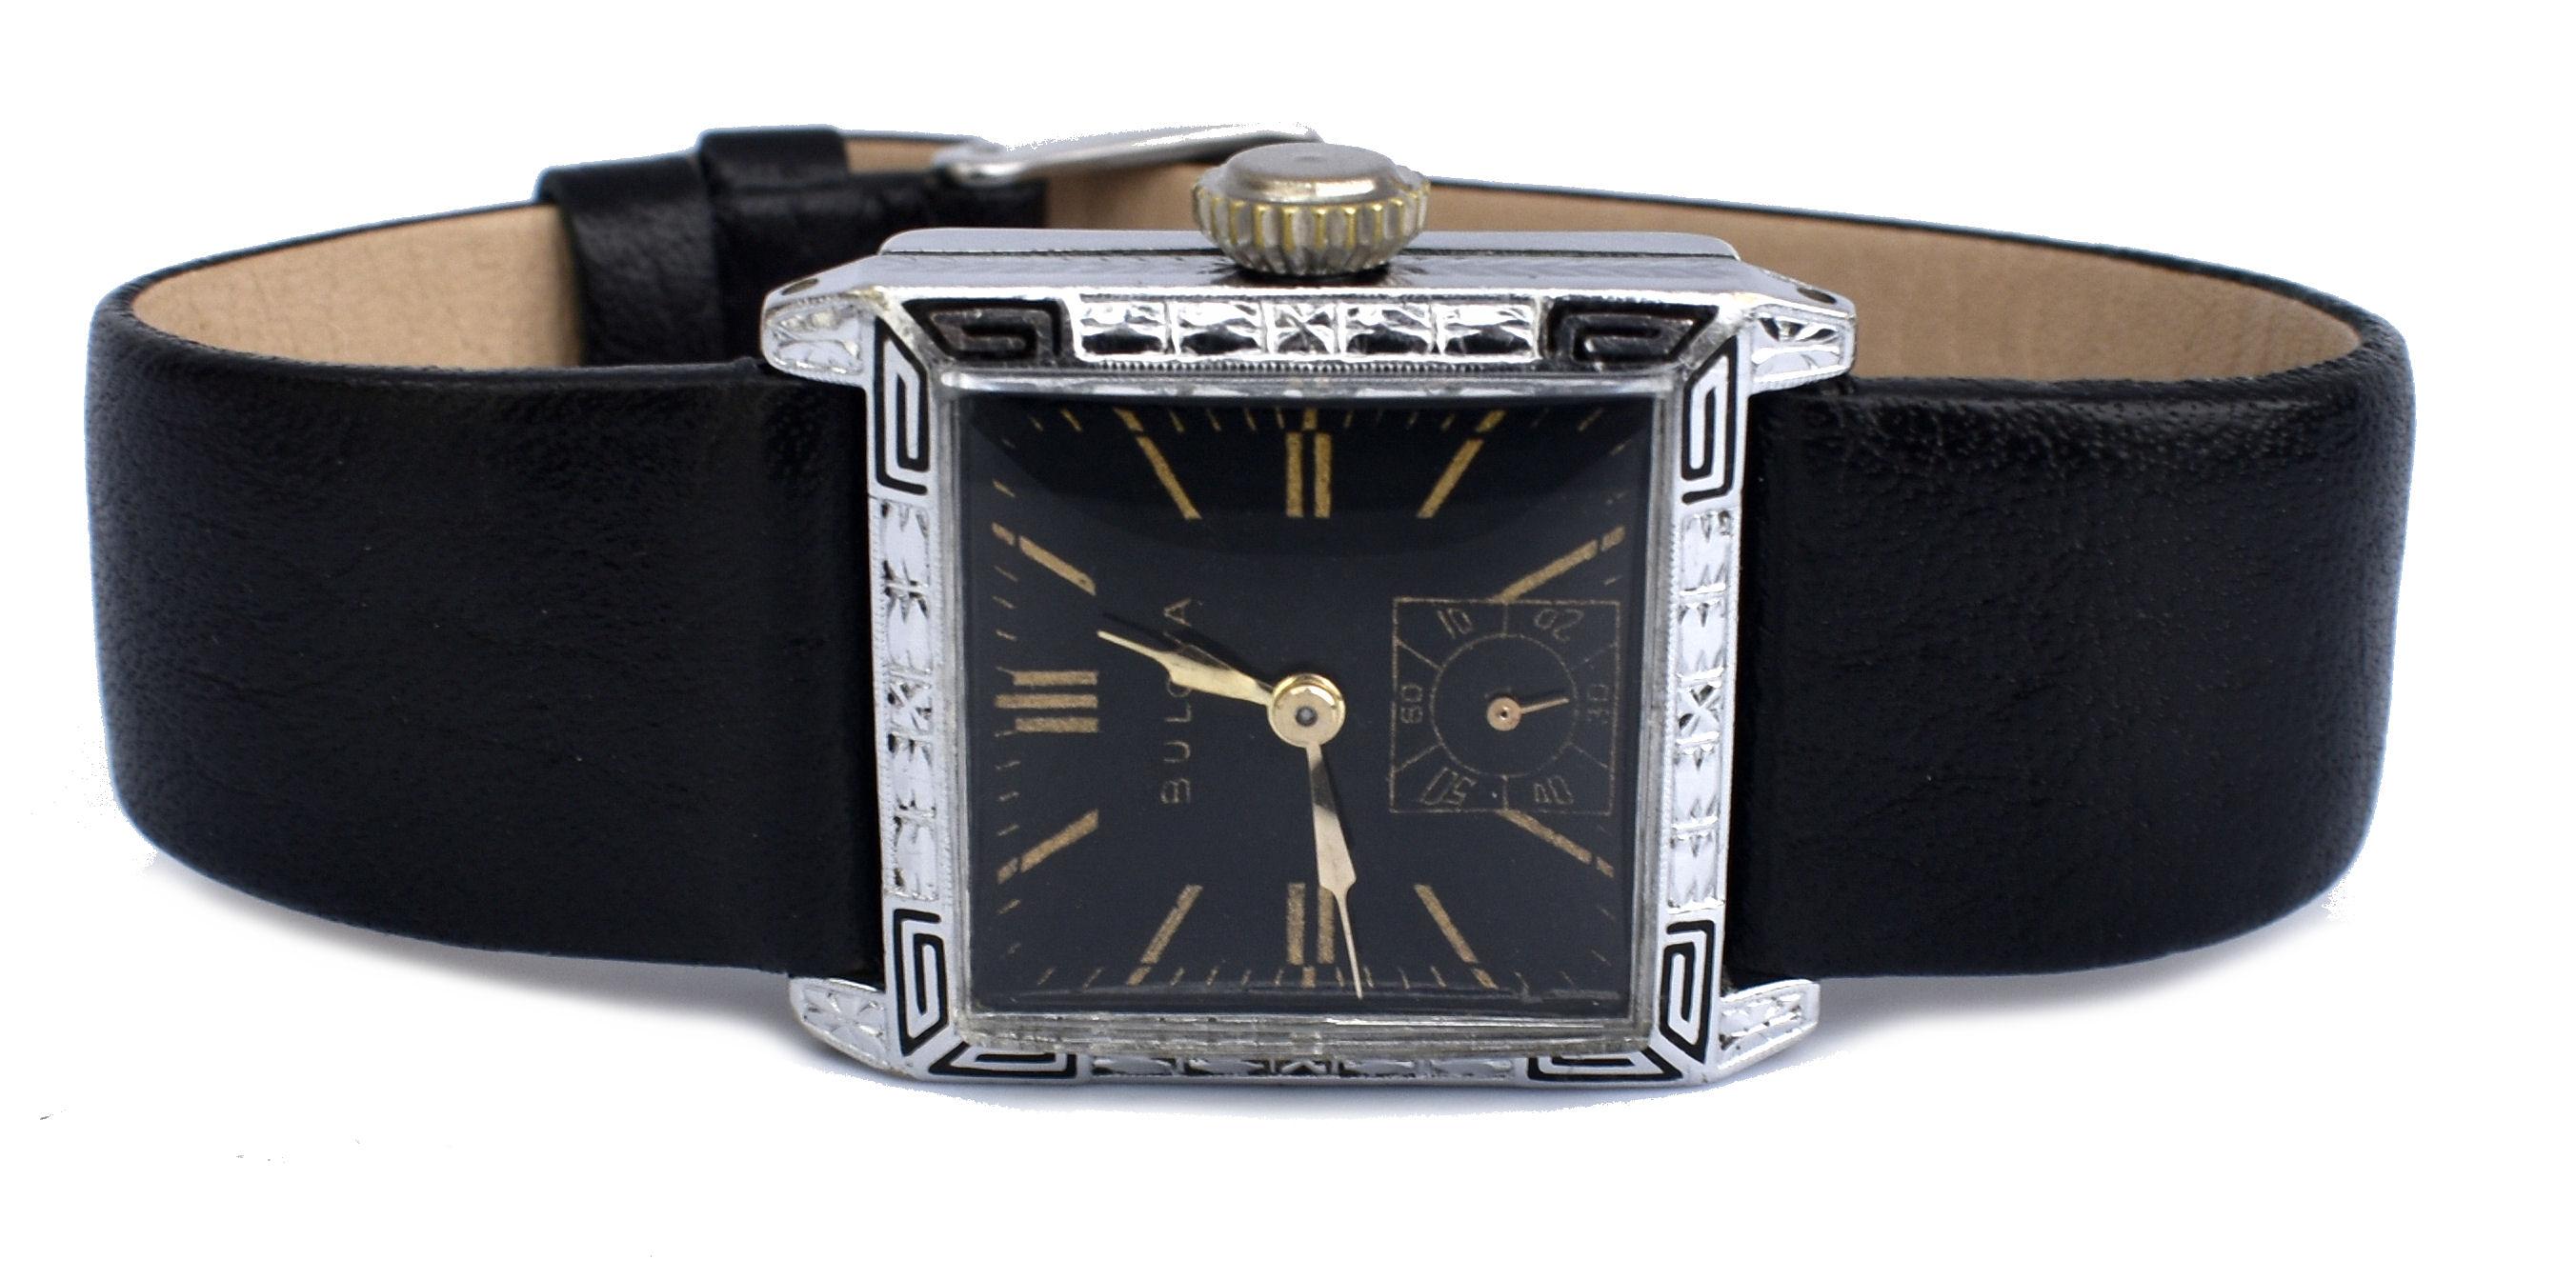 For your consideration is this fabulously stylish Art Deco Gents manual wrist watch by the American watch company Bulova. This 93 year old Art Deco watch known as the ‘franklin’ and has a rare black dial, with gold numerals with a 14k white gold